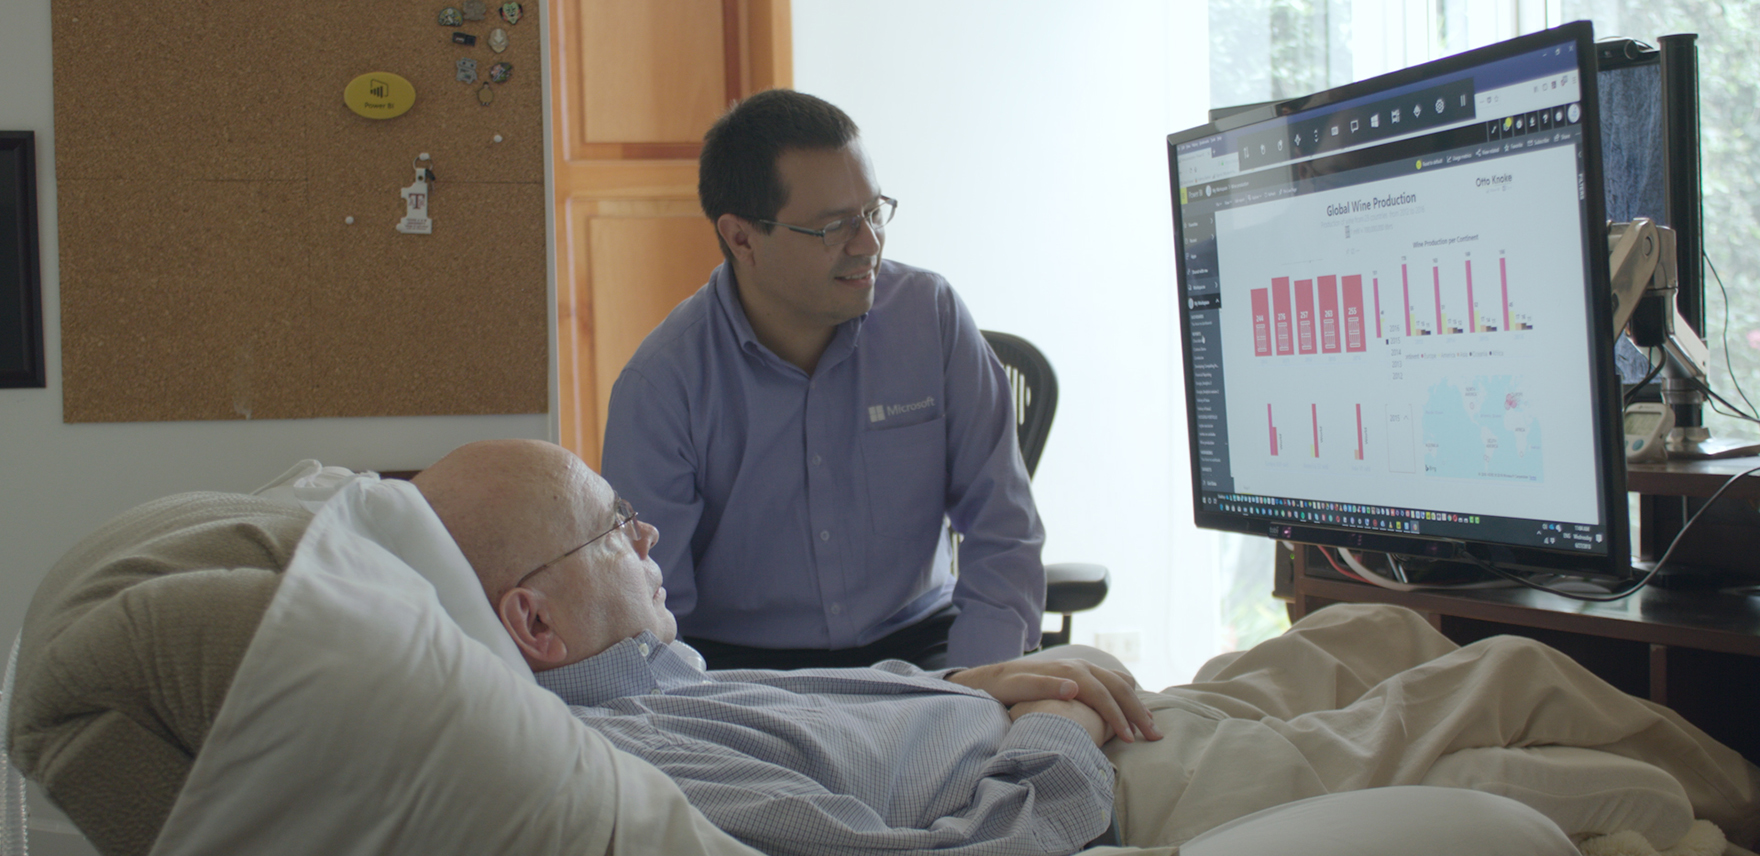 Older man (Otto Knoke) in a hospital bed and younger man (his friend and former colleague, Juan Alvarado) sitting beside him a Power BI report Knoke created using eye-tracking software for Windows 10 on a display monitor at the foot of the bed